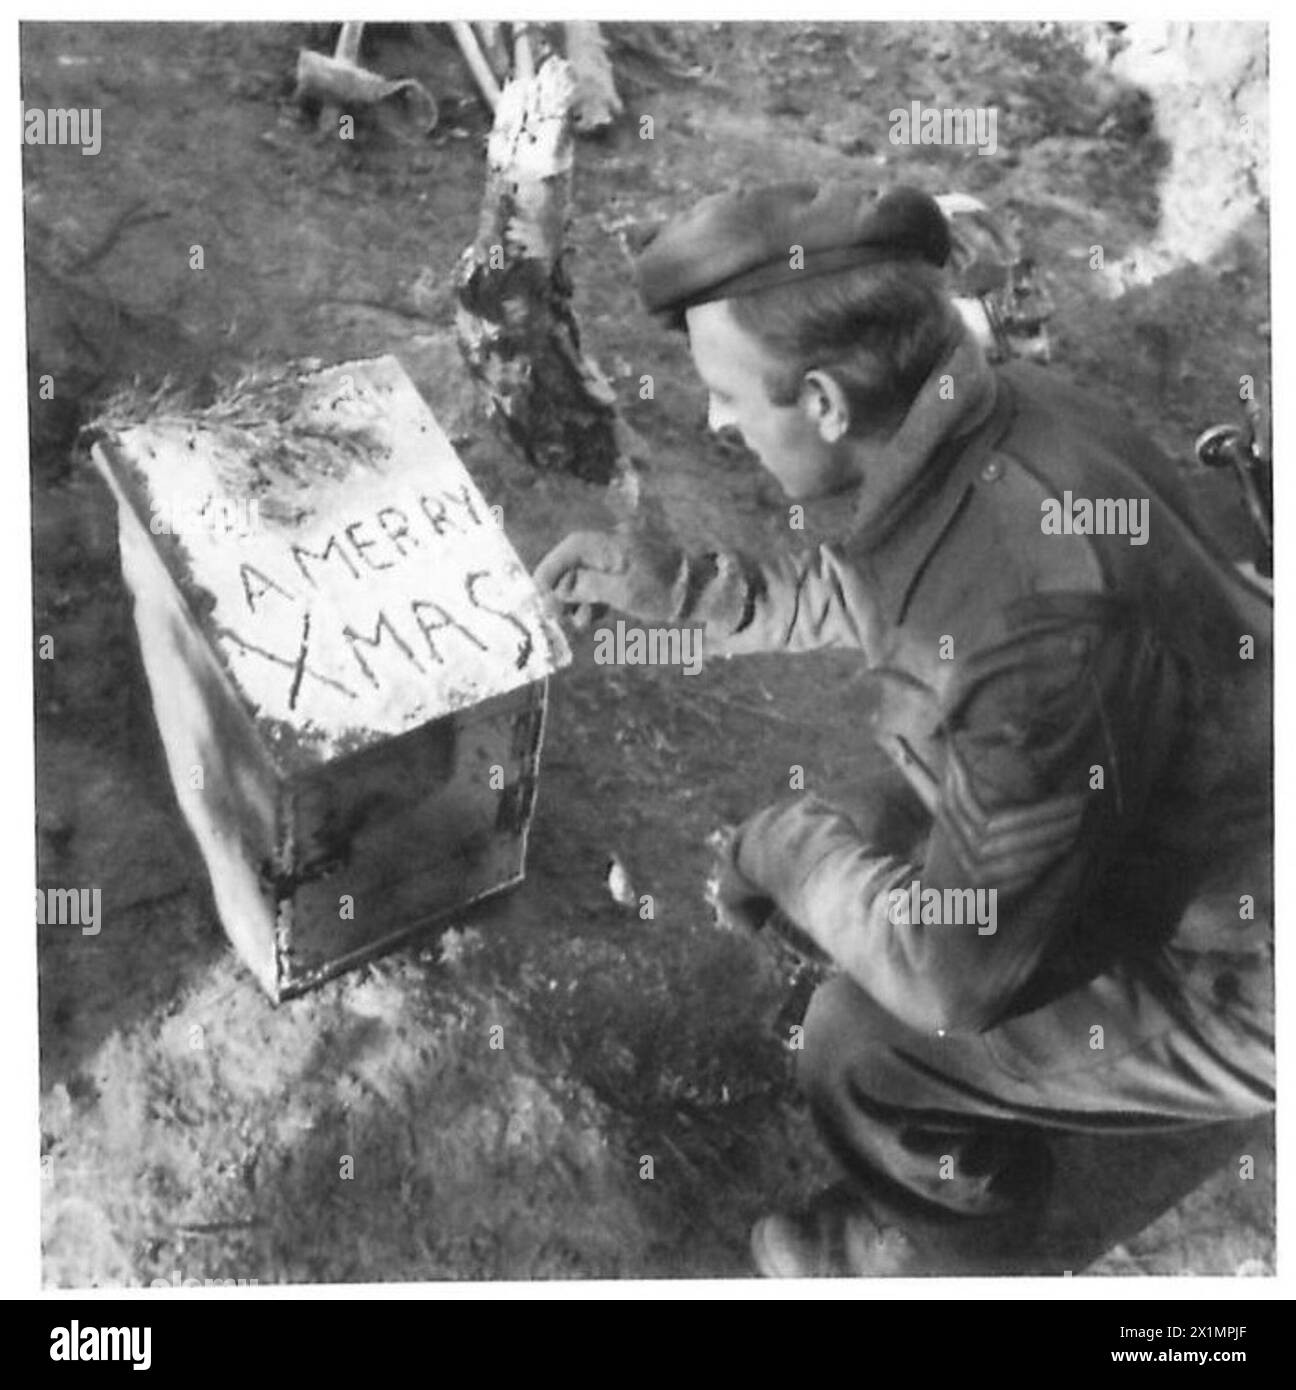 XMAS DAY IN GERMANY - Sgt. George Venn (Walworth) writes a greeting in the frost on the Post Box. RA , British Army, 21st Army Group Stock Photo